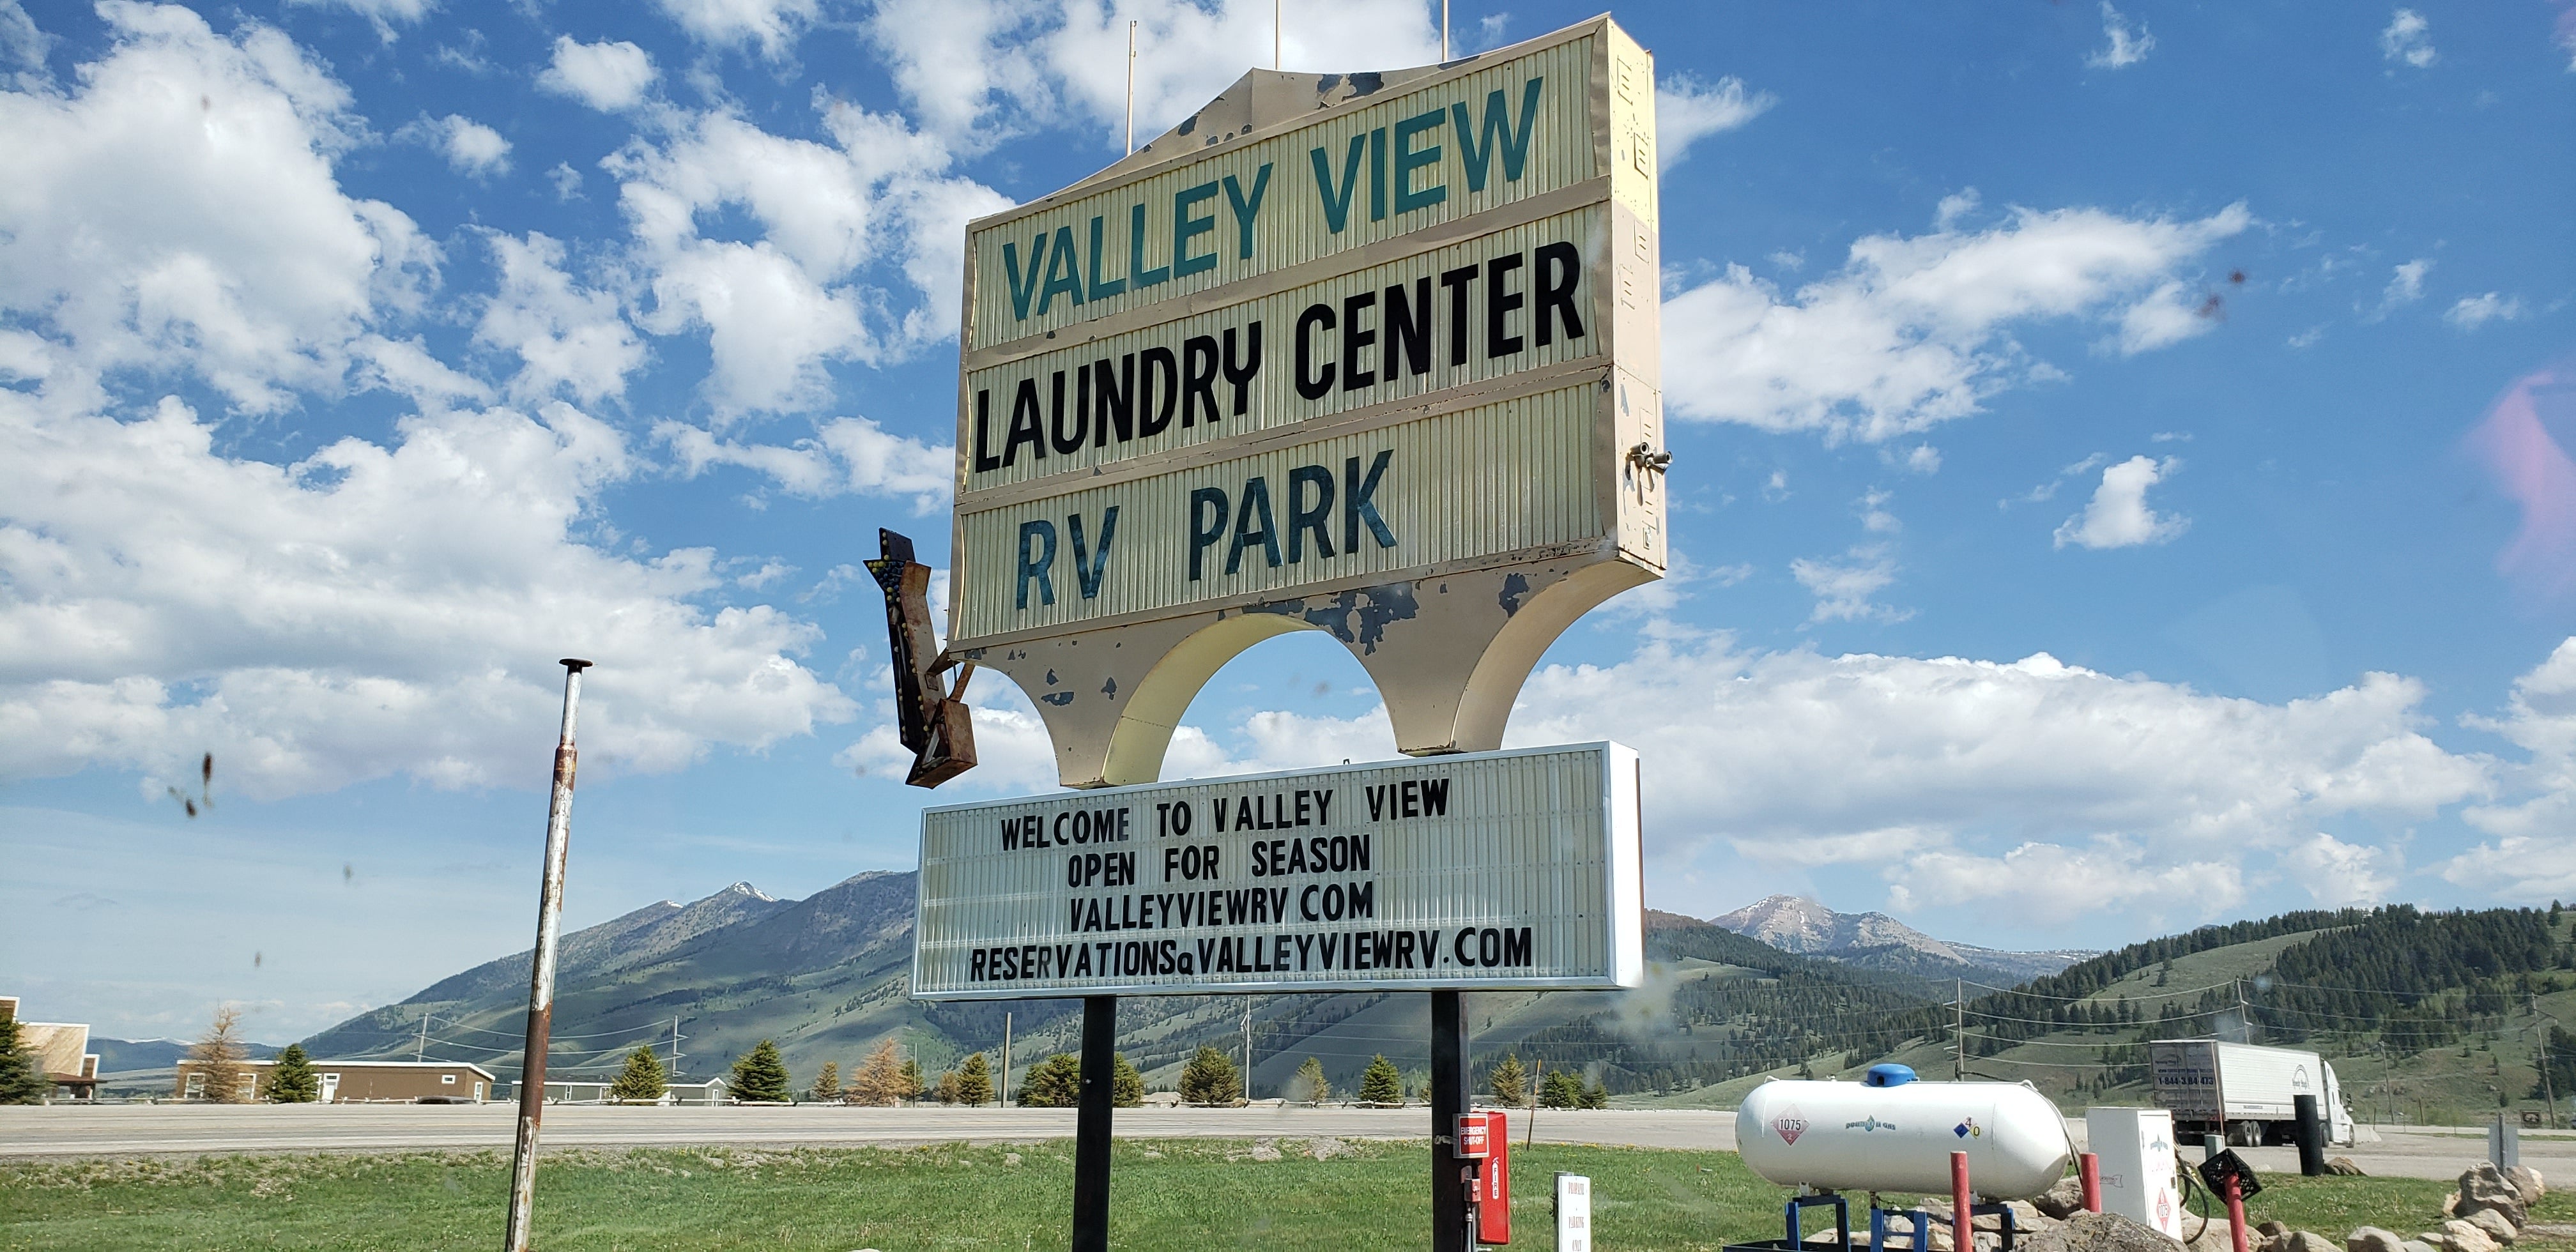 Camper submitted image from Valley View RV Park - 5